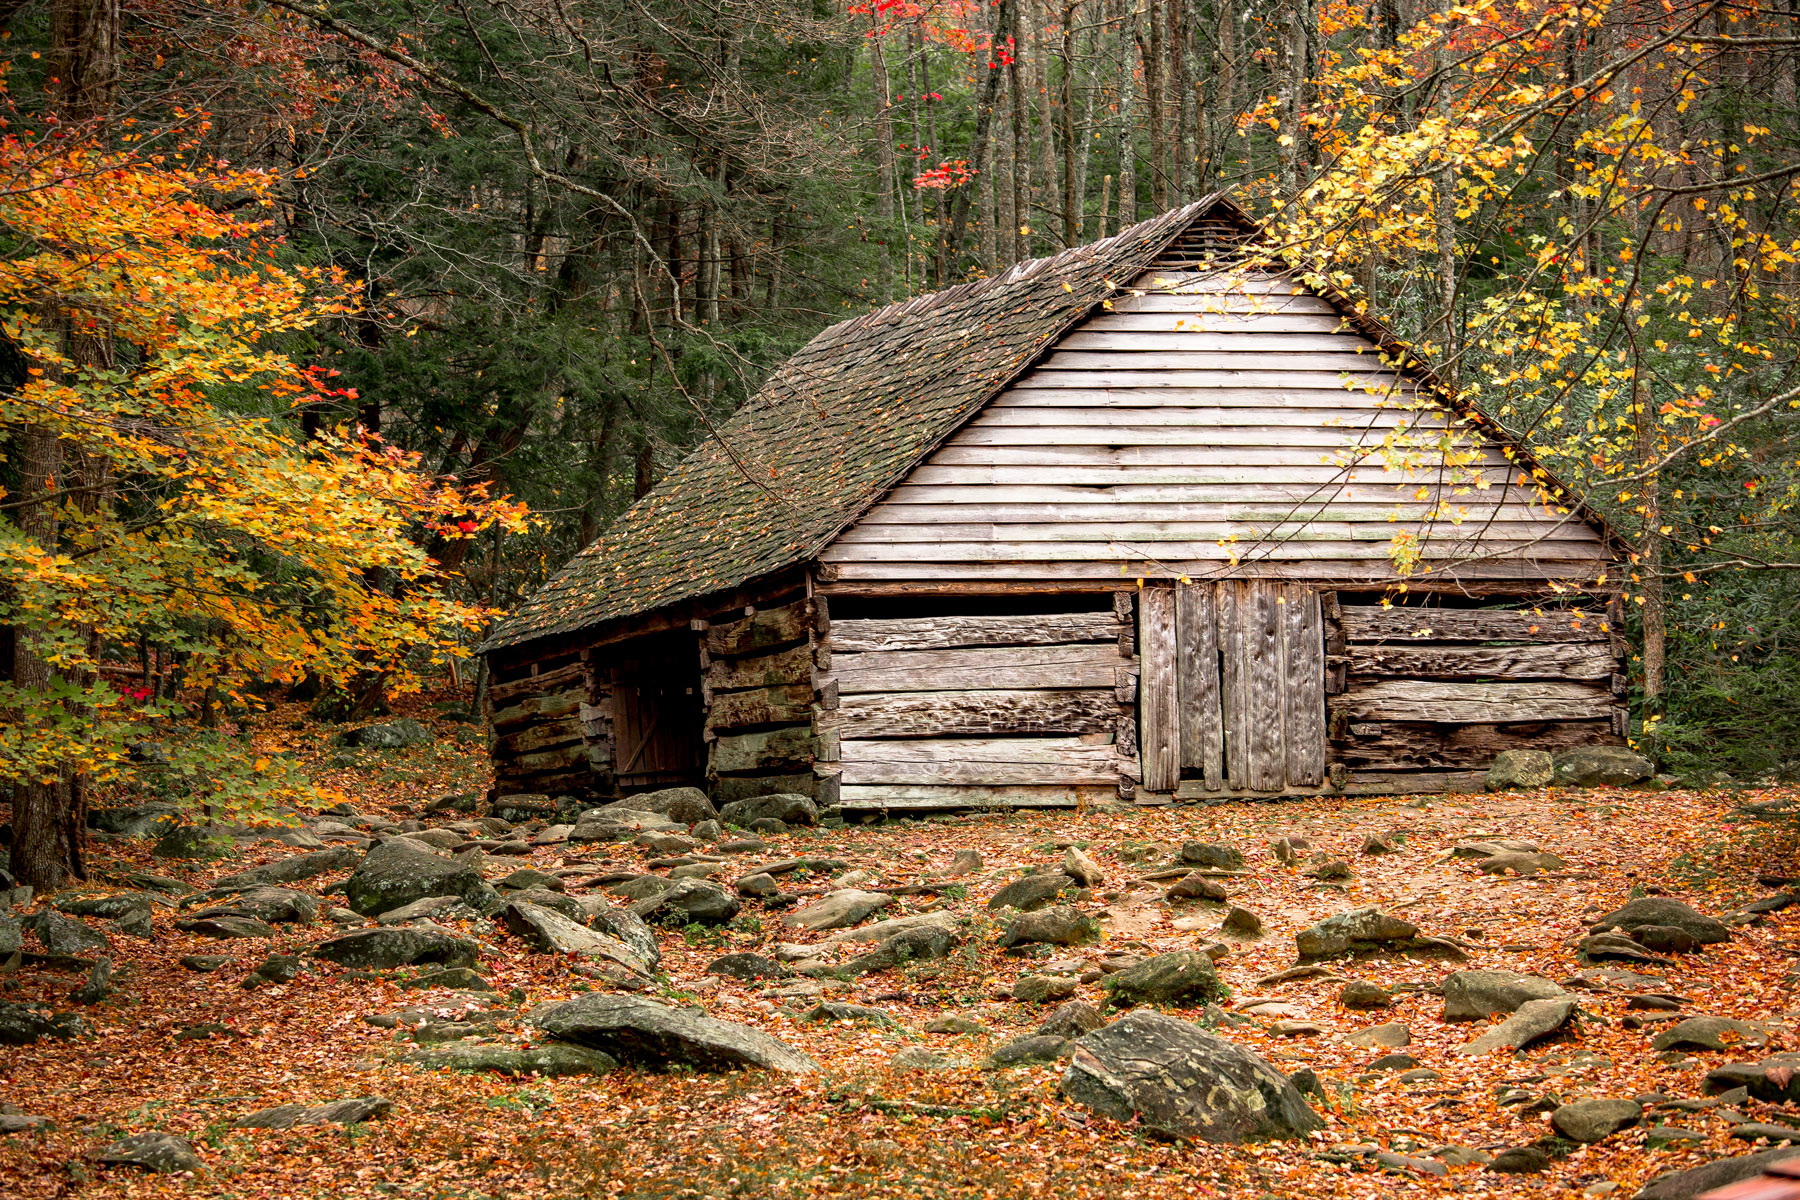 Historic Cabin at Great Smoky Mountains | Great Smoky Mountains National Park